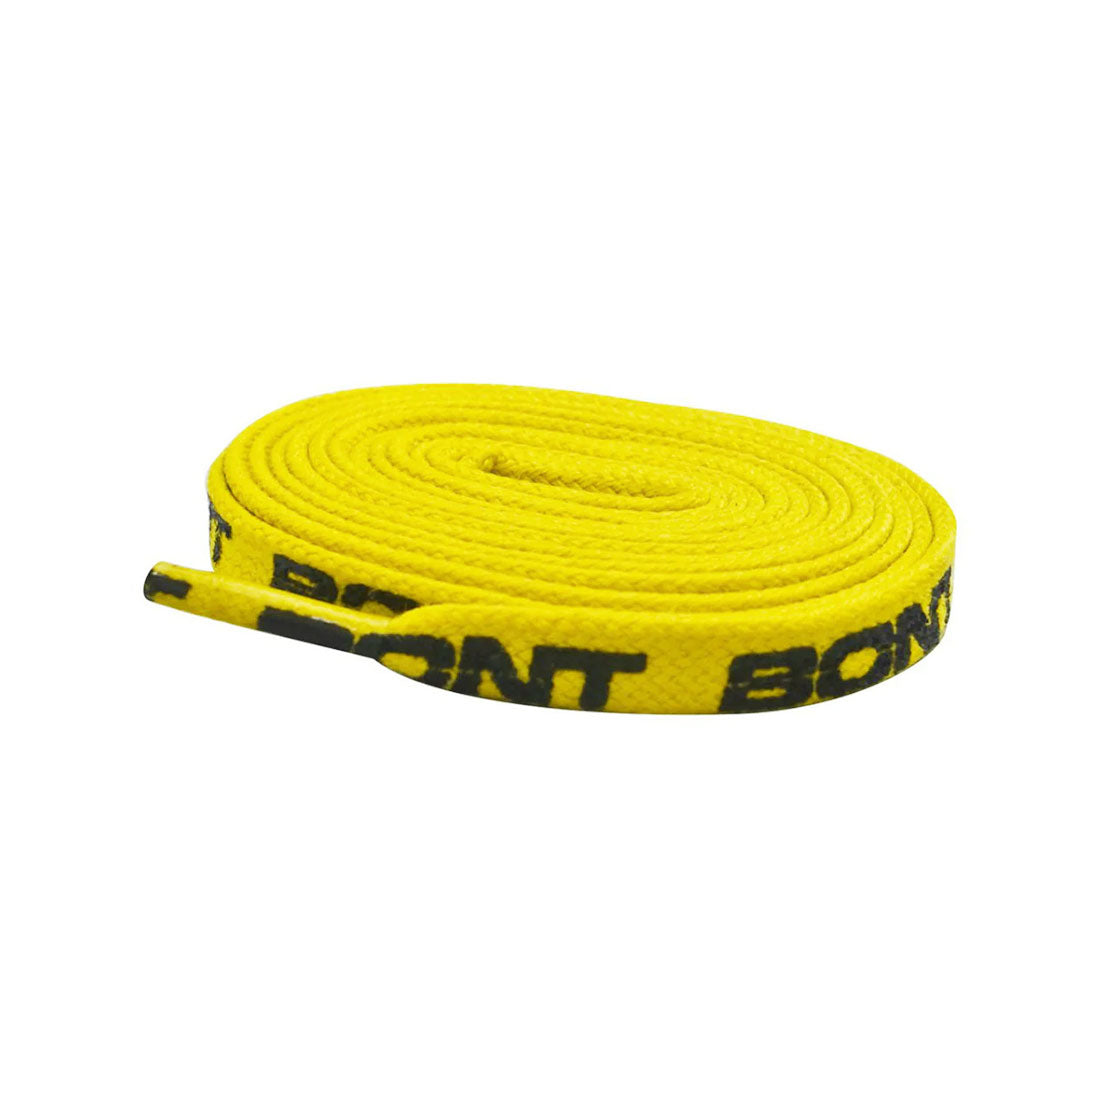 BONT Skate 10mm Laces - 150cm / 59in - Yellow Laces